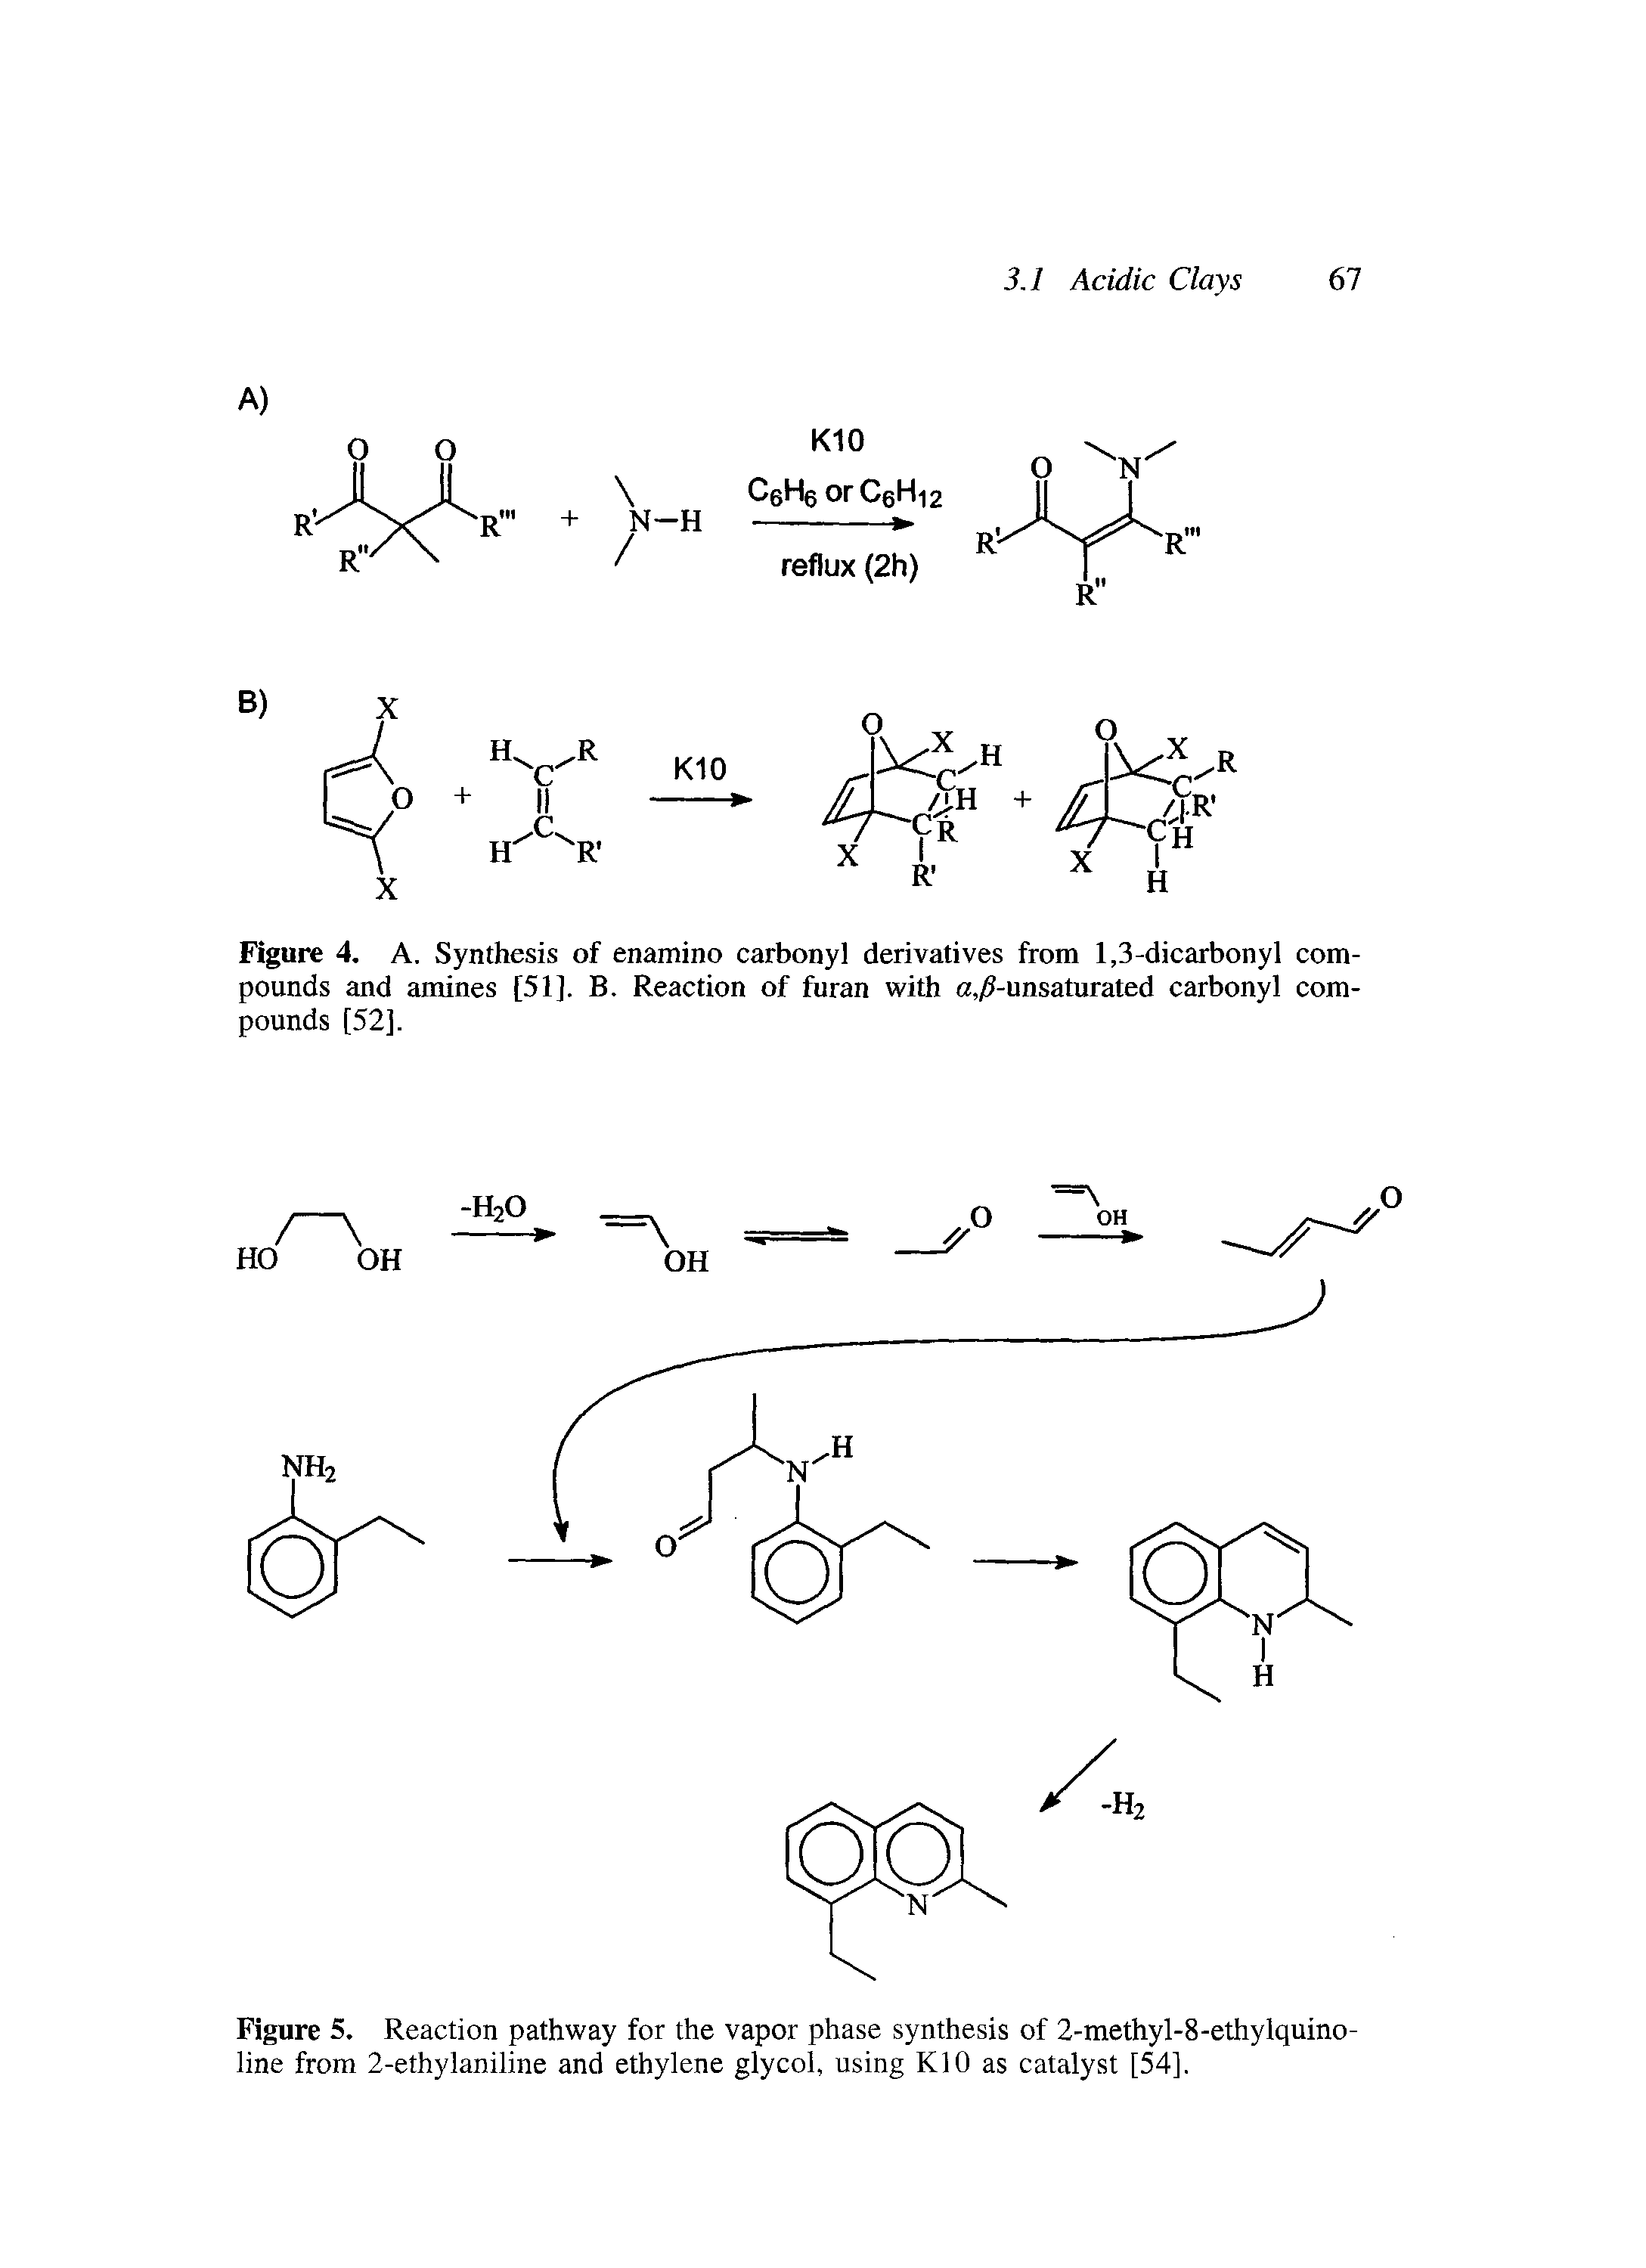 Figure 5. Reaction pathway for the vapor phase synthesis of 2-methyl-8-ethylquino-line from 2-ethylaniline and ethylene glycol, using KIO as catalyst [54],...